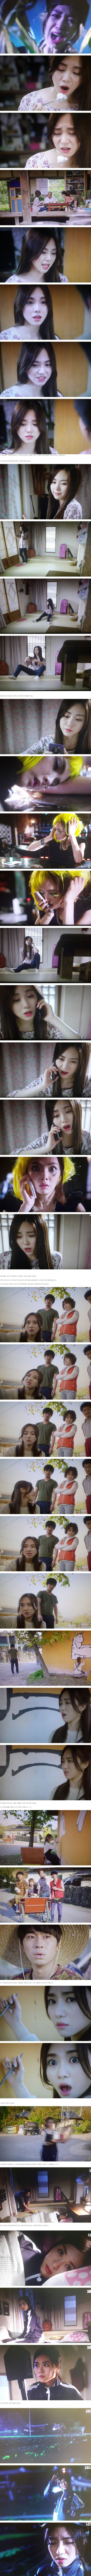 episodes 4 and 5 captures for the Korean drama 'Modern Farmer'